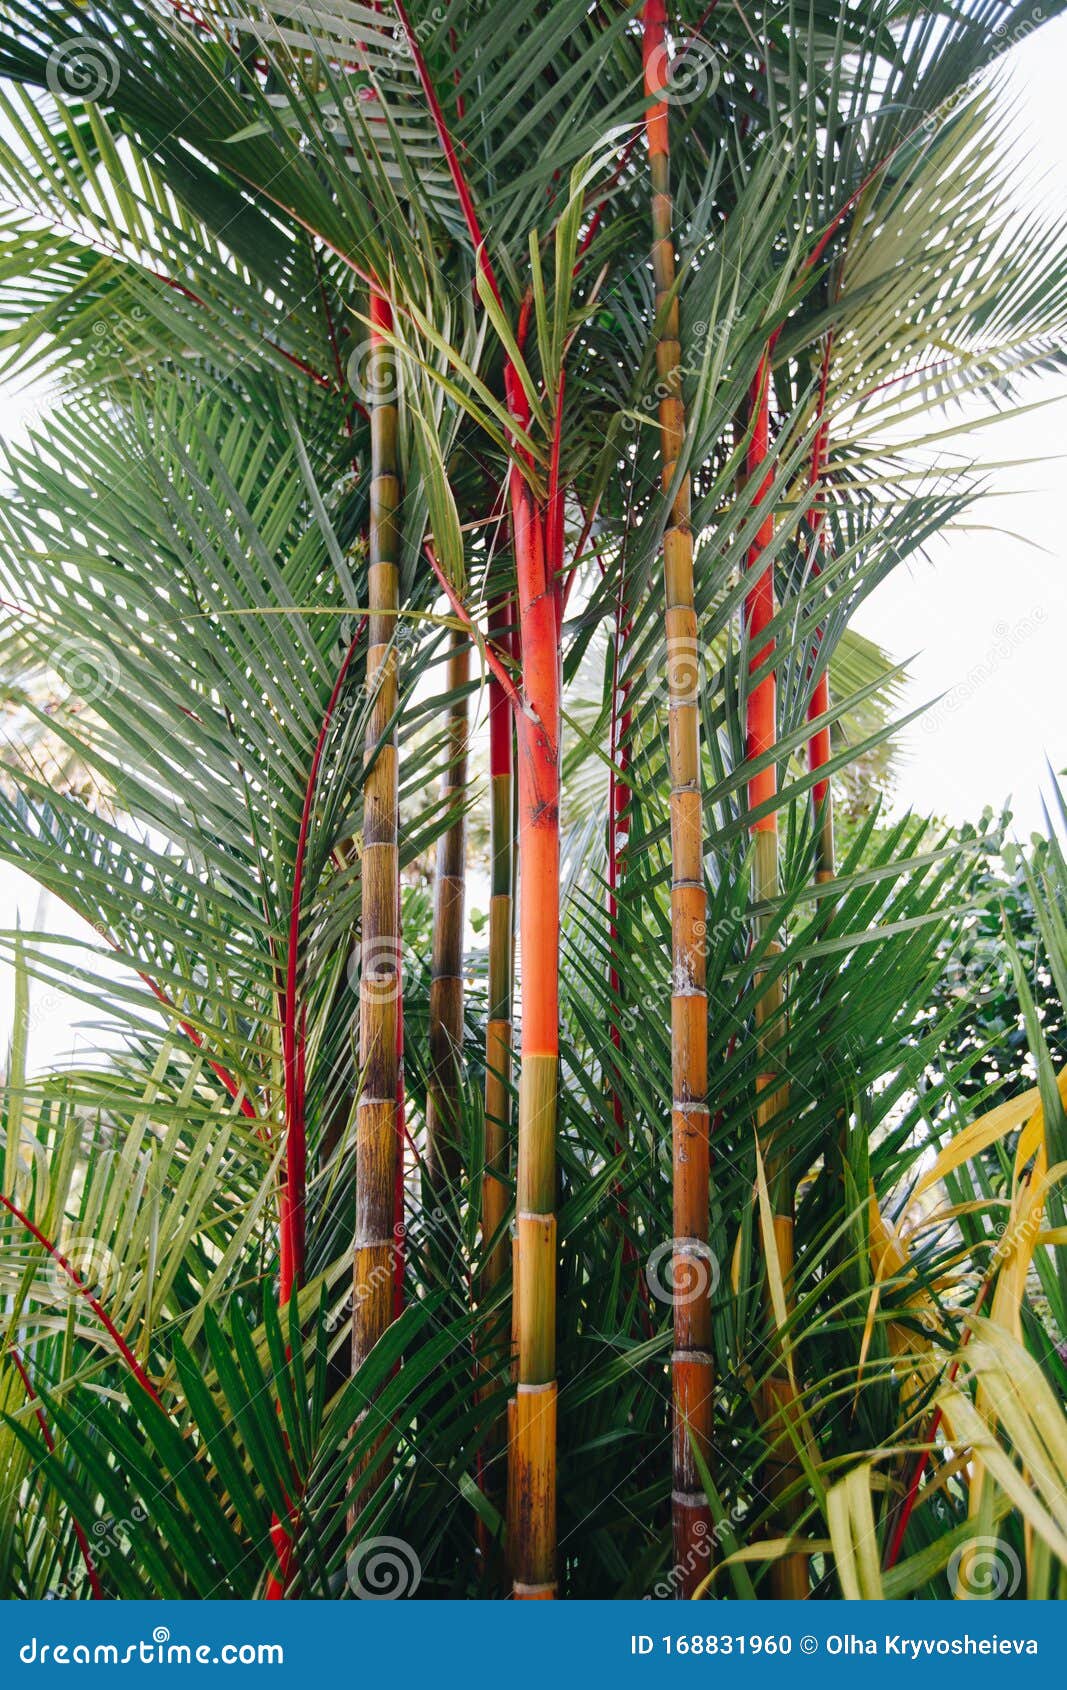 lipstick palm cyrtostachys renda beautiful bushy palm tree with a red trunk and green leaves